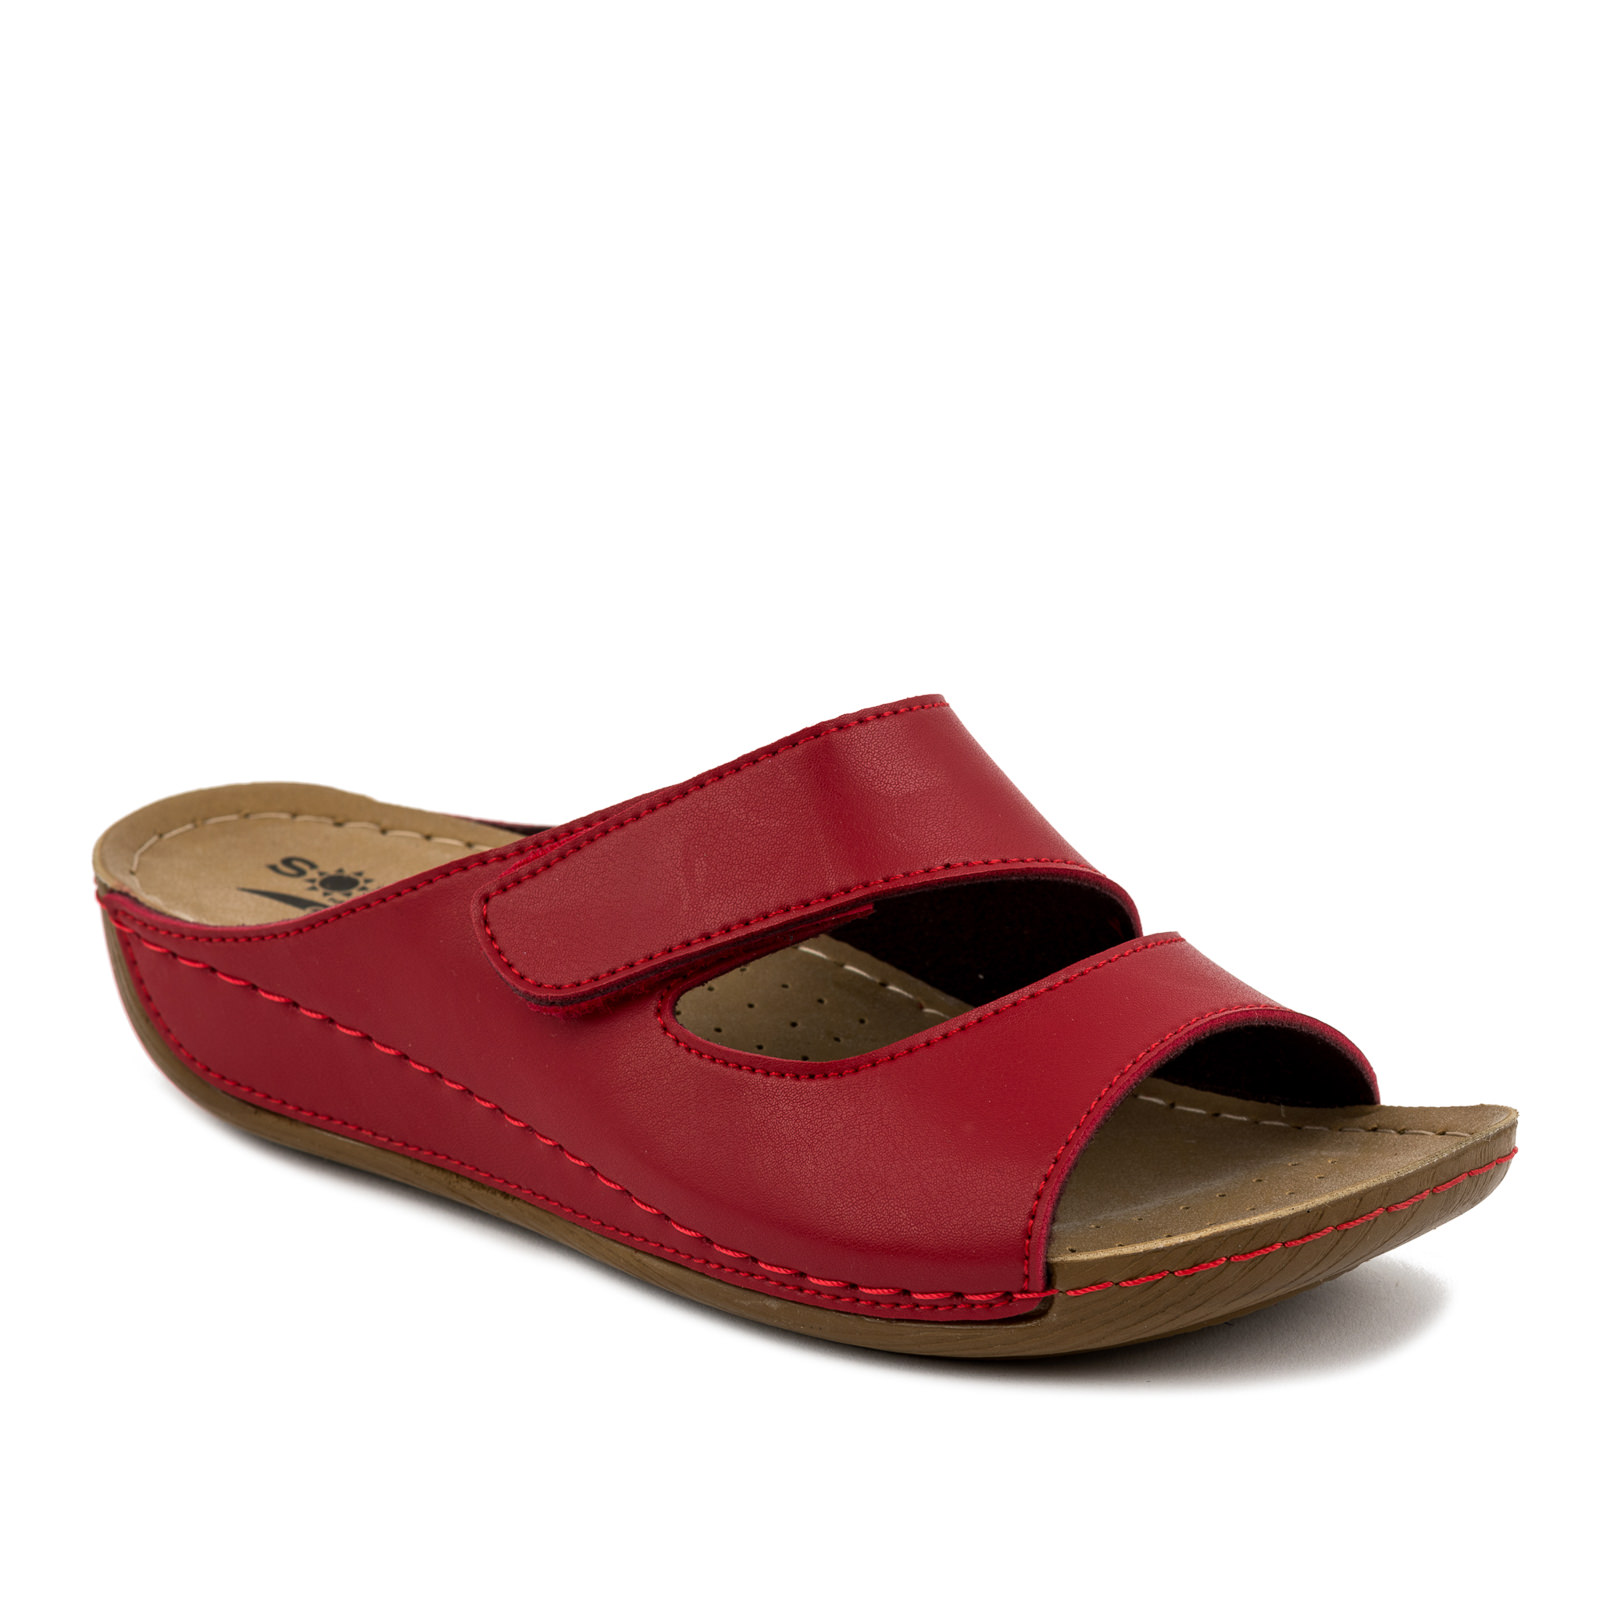 ANATOMICAL SLIPPERS WITH VELCRO BAND -  RED